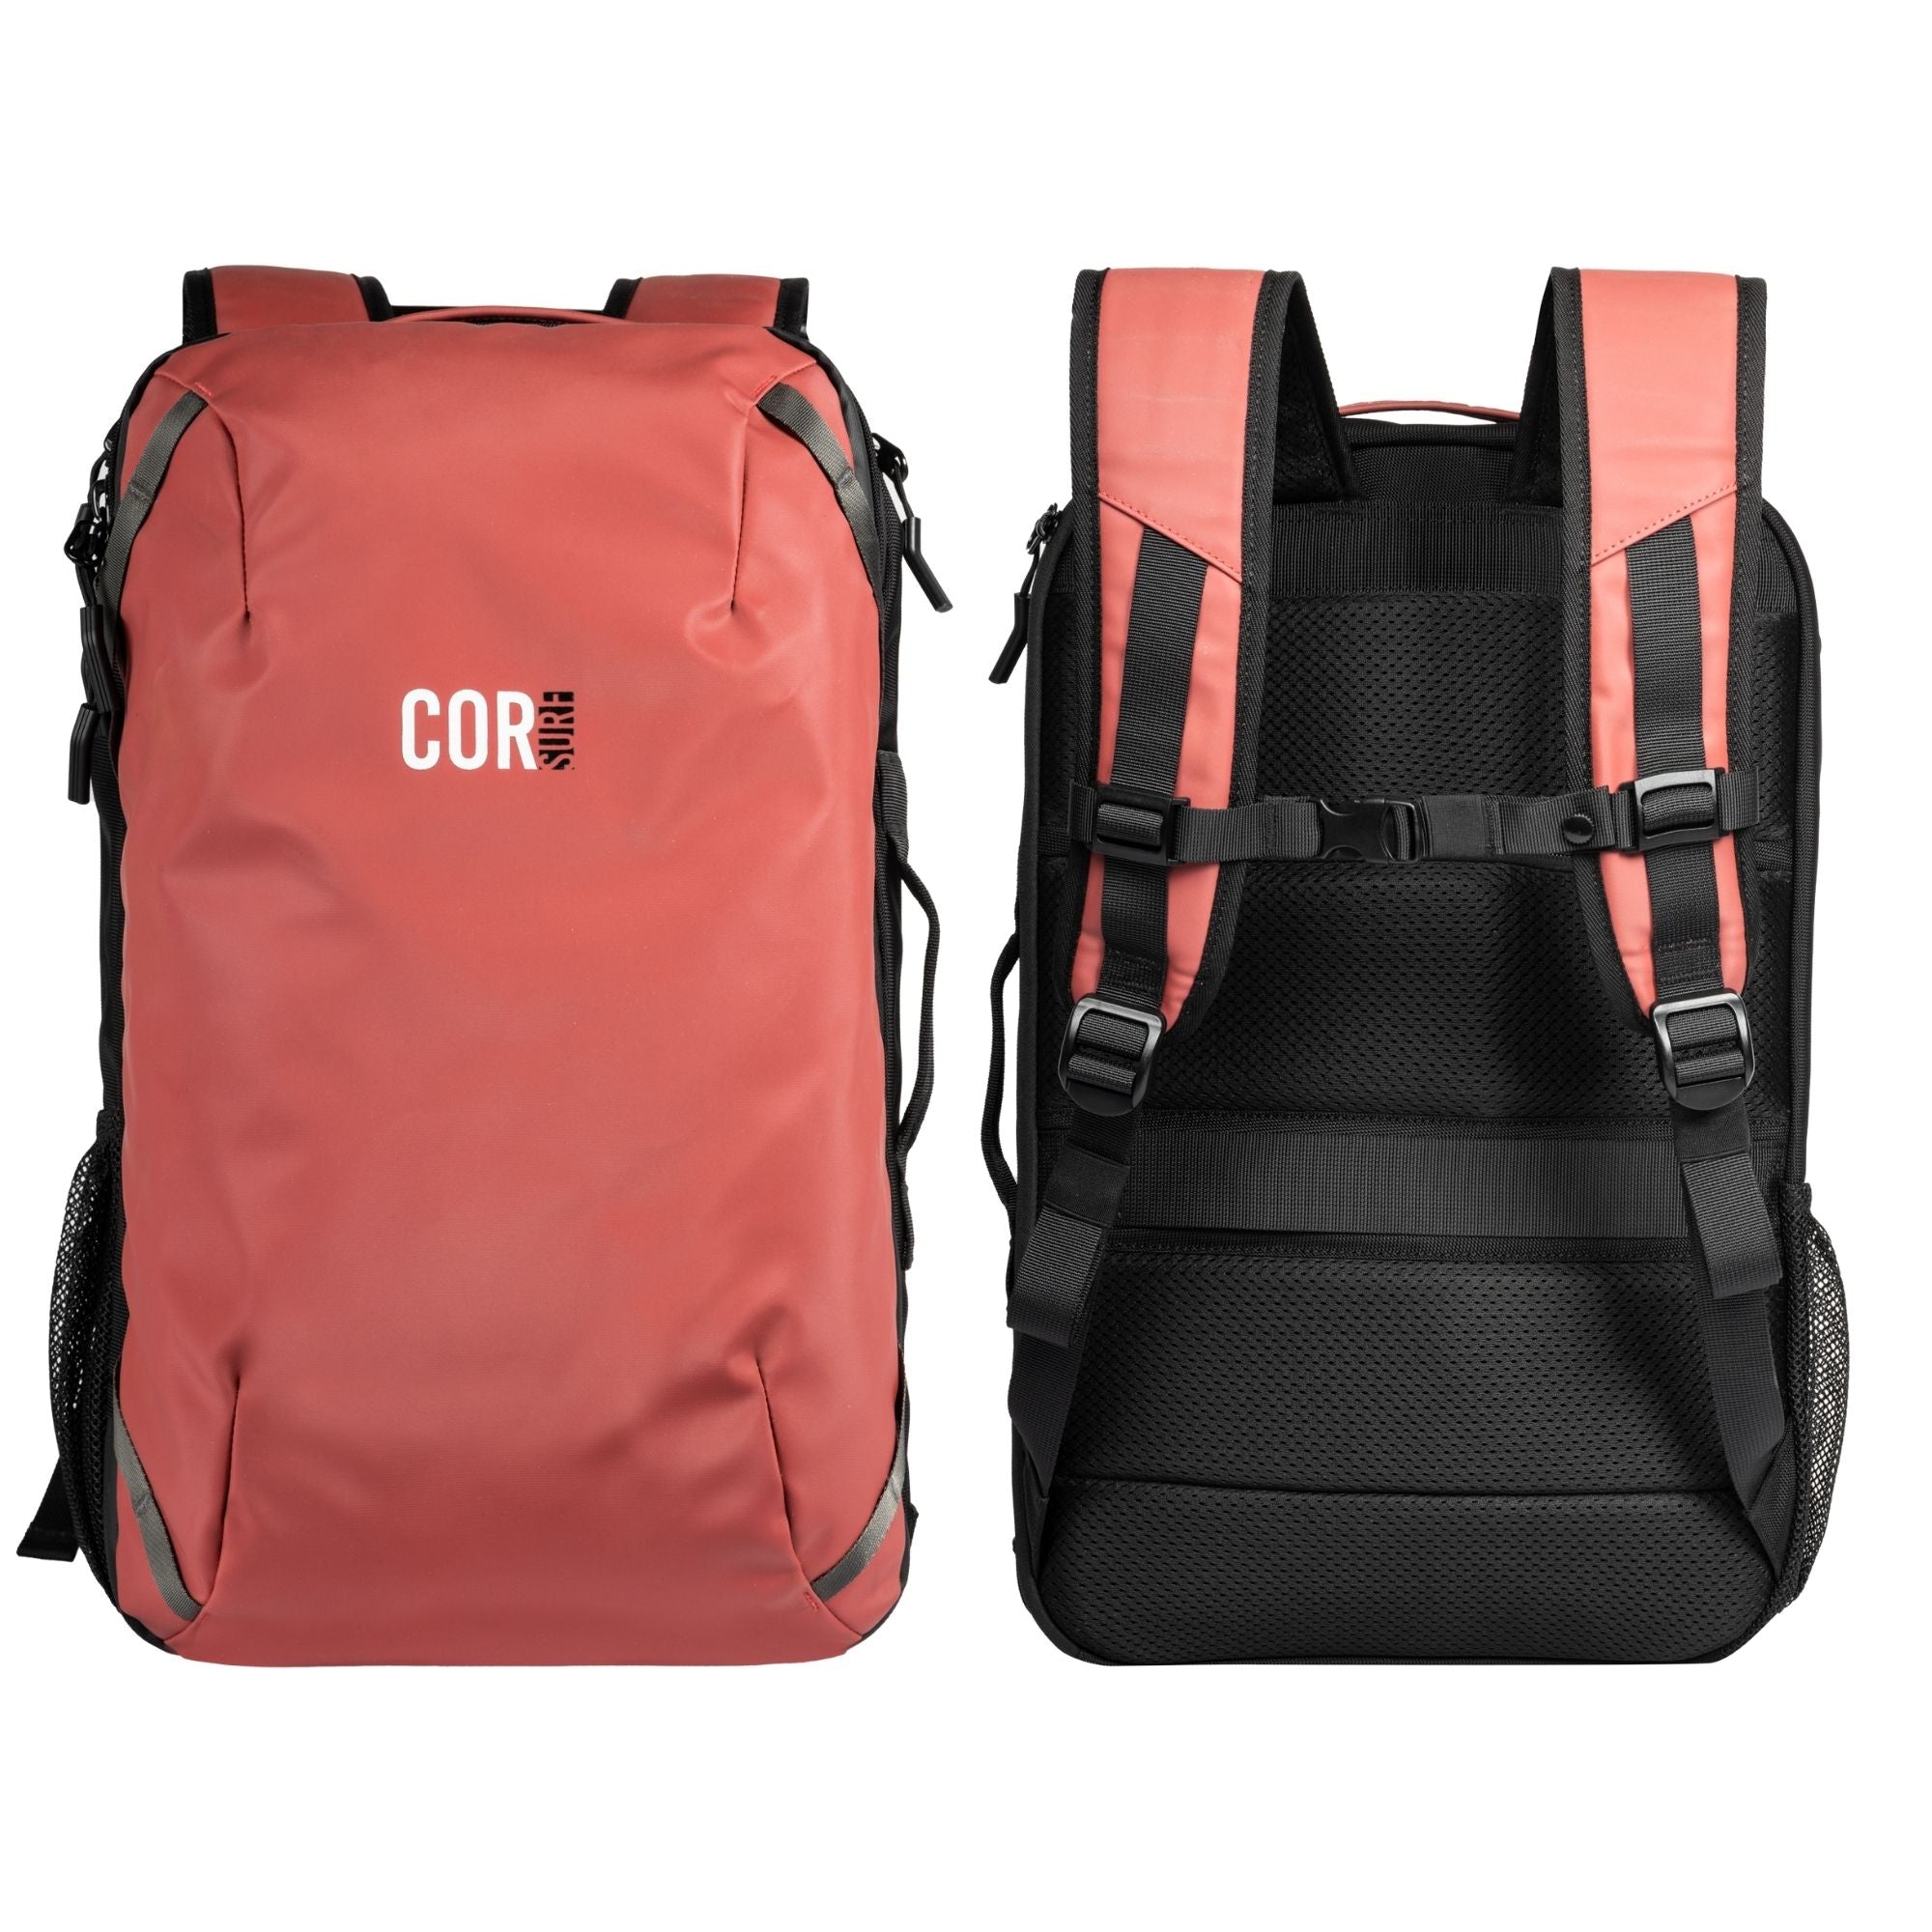 COR Surf on Instagram: “Without question, the best backpack I